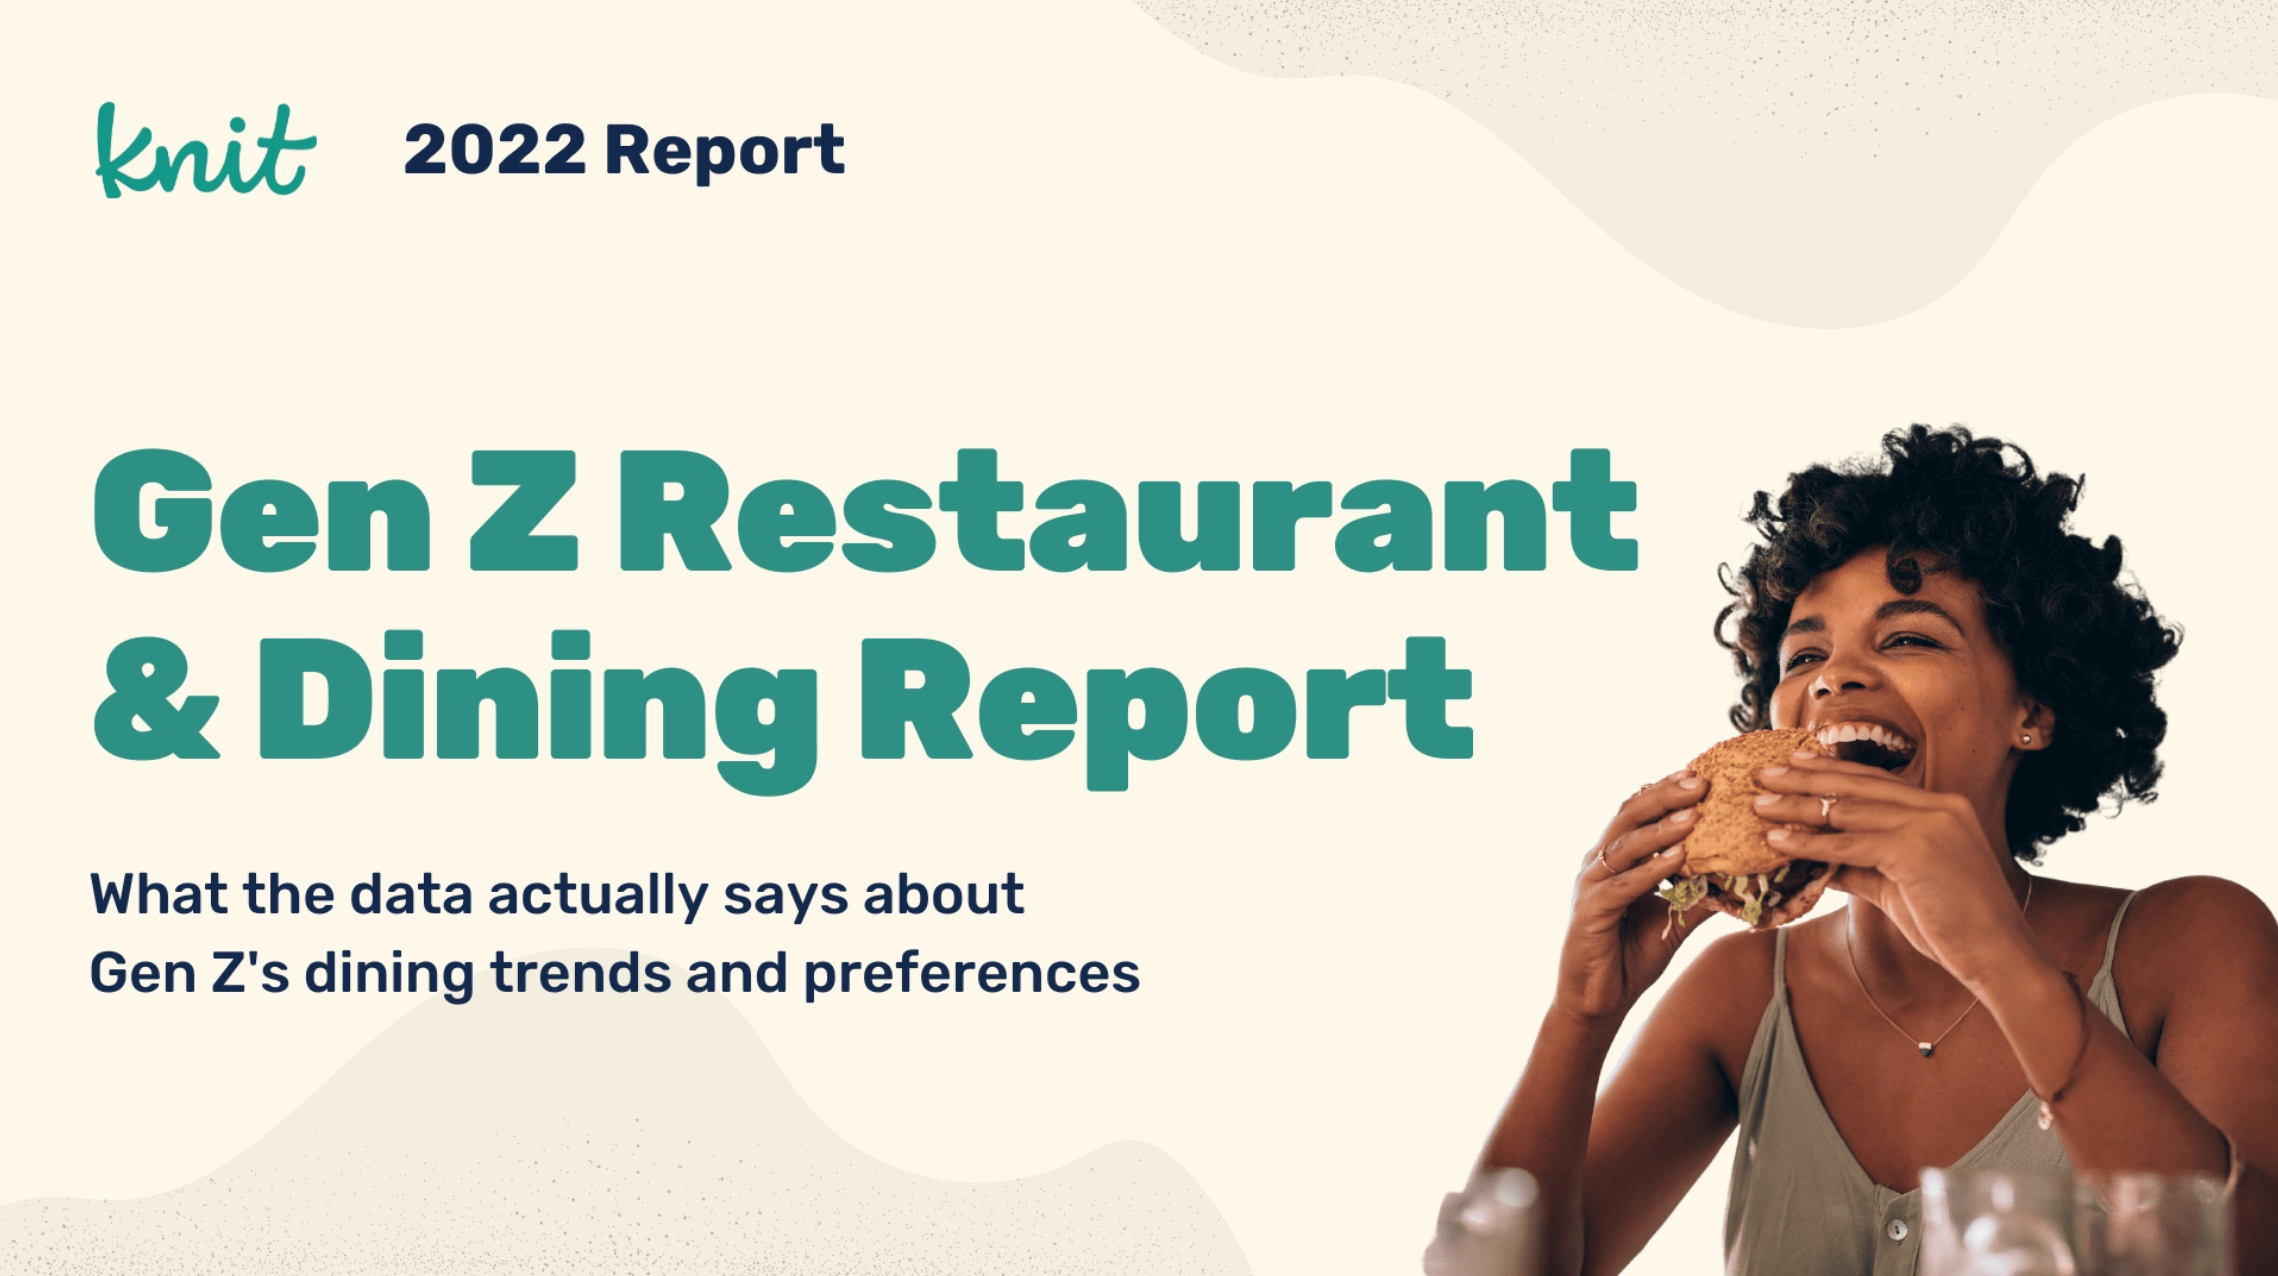 Knit Gen Z Dining Report Cover